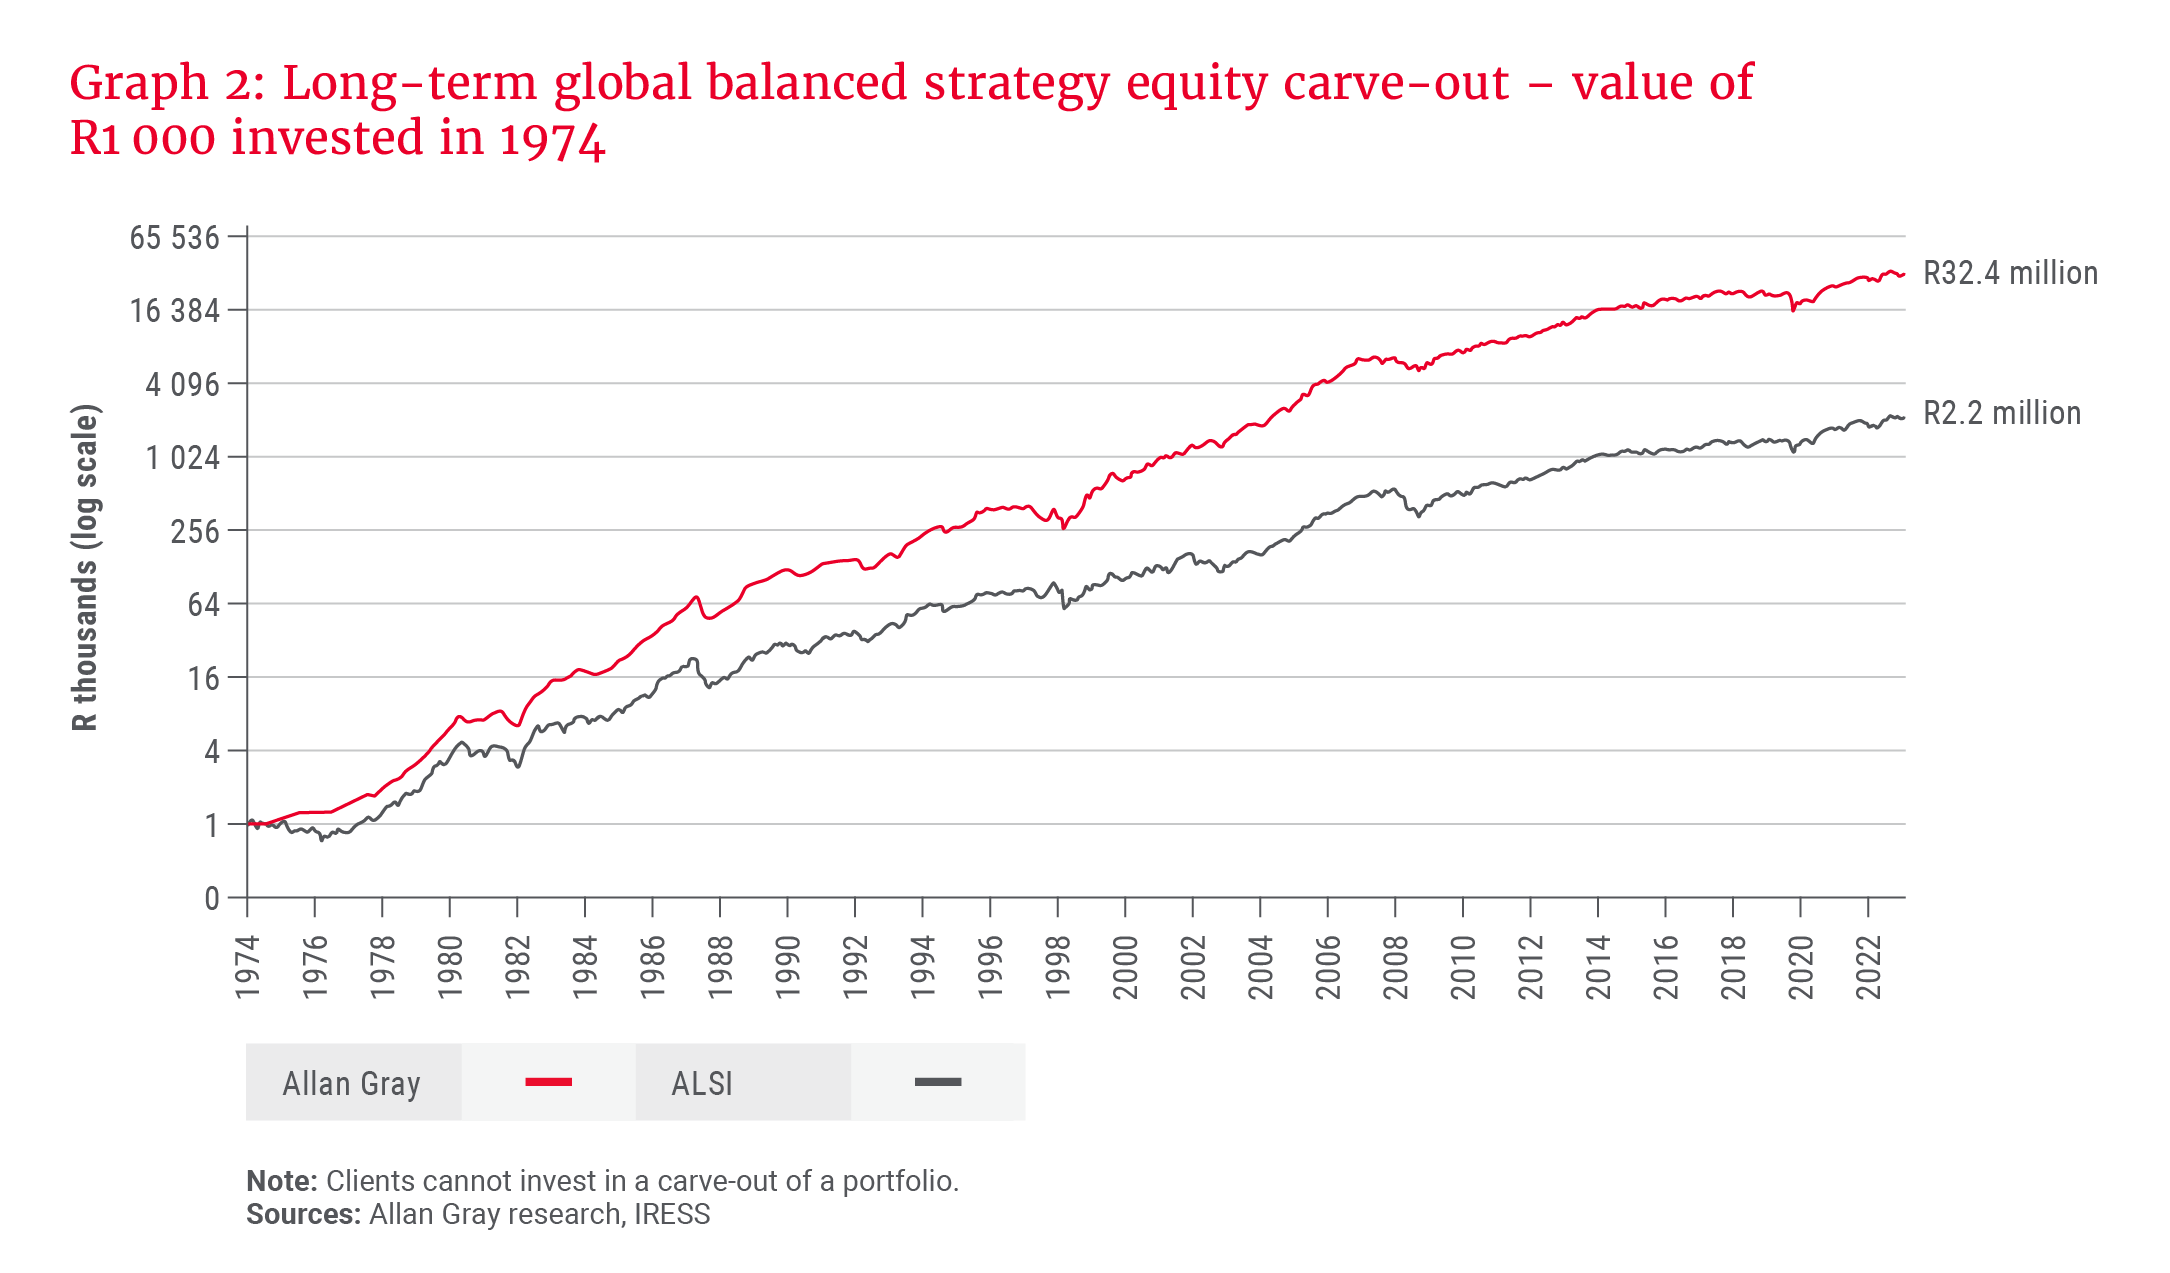 Long-term global balanced strategy equity carve-out – value of R1 000 invested in 1974